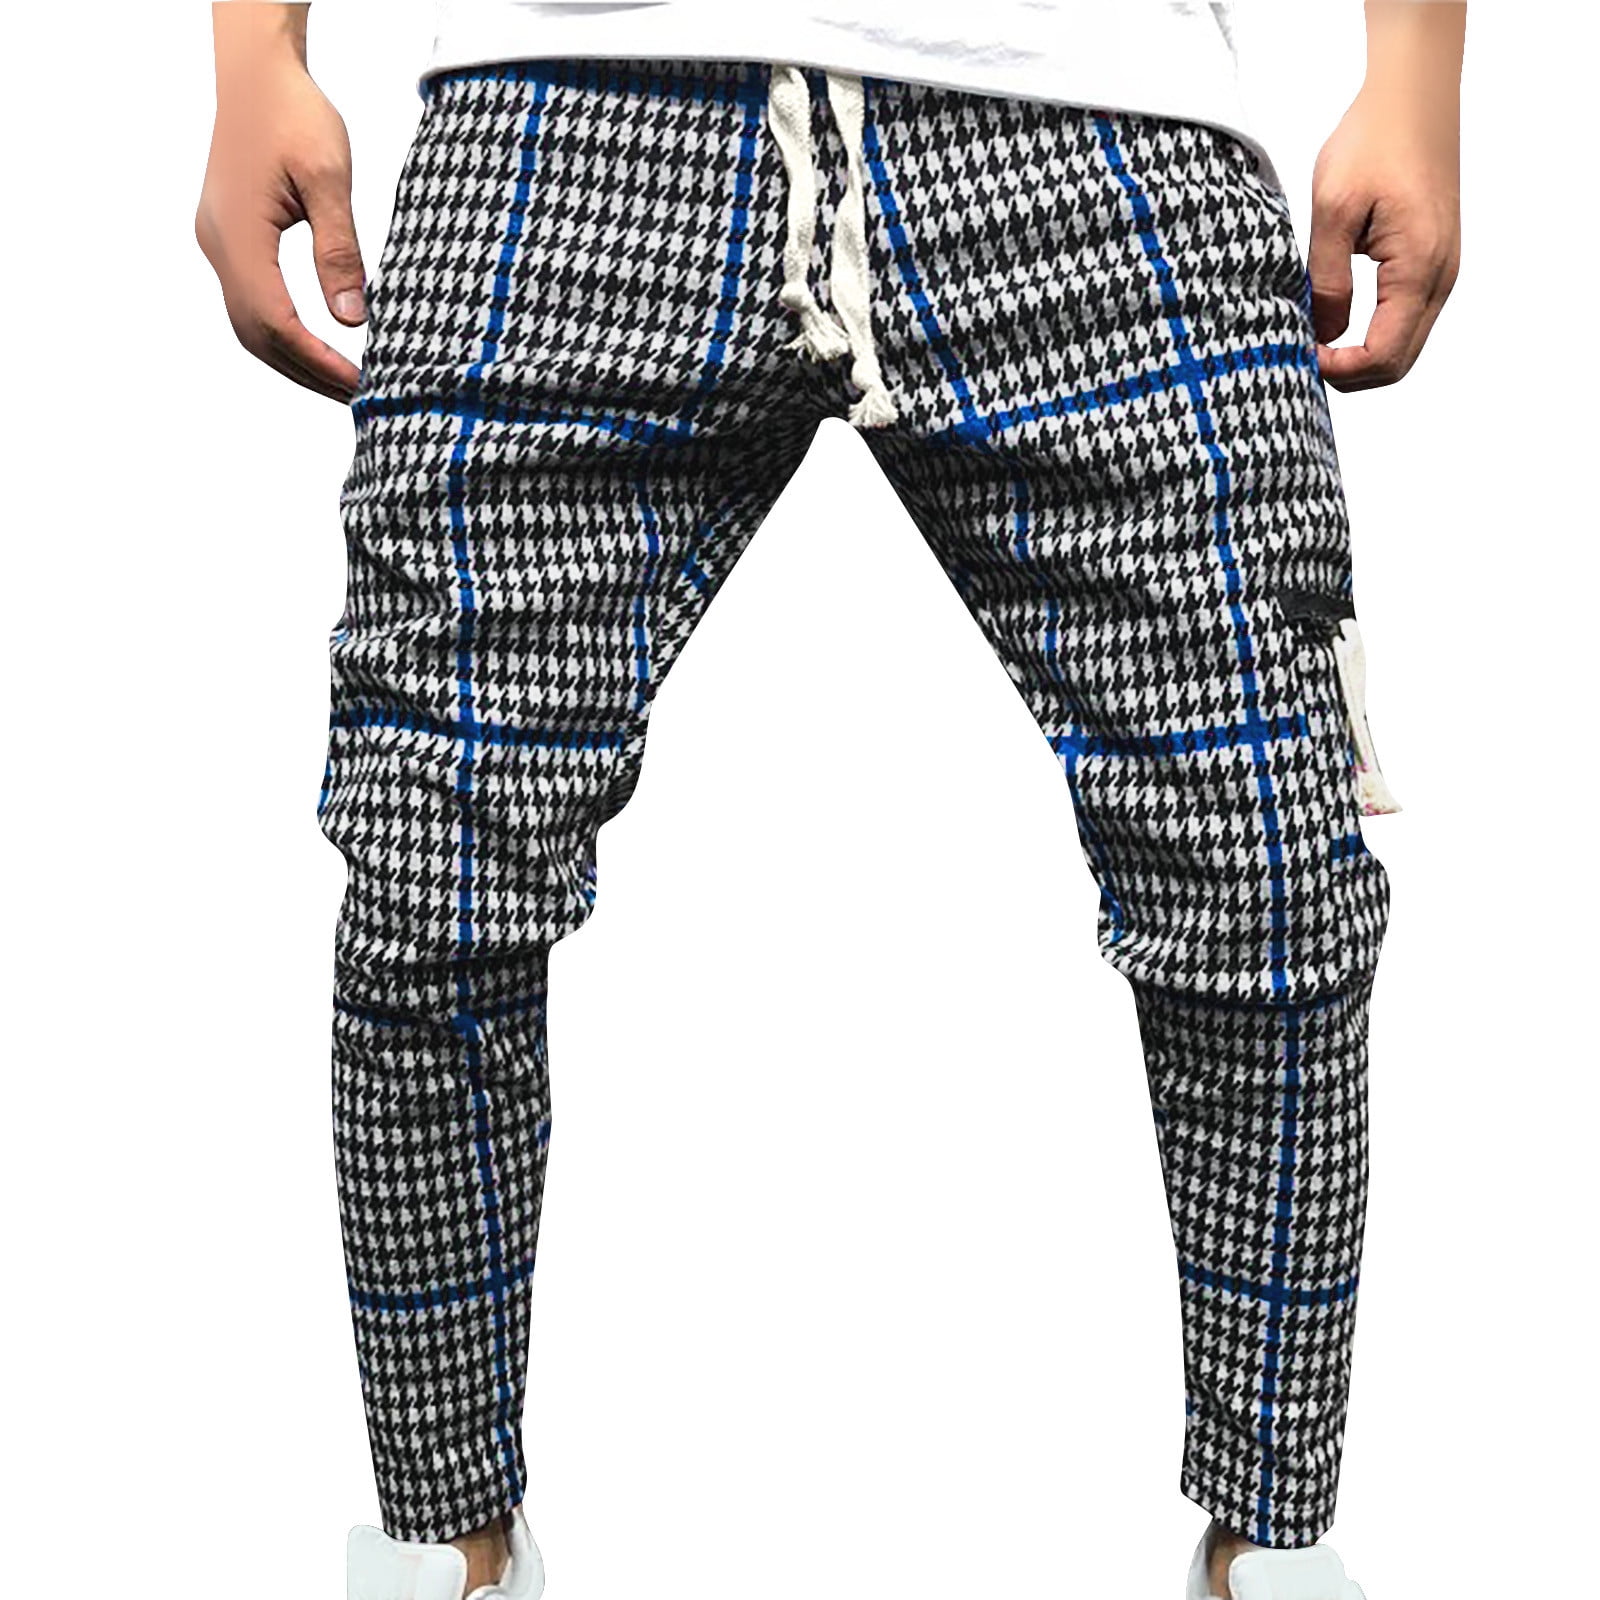 Men's Checkered Pants Outfits – How to Wear and When | Berle